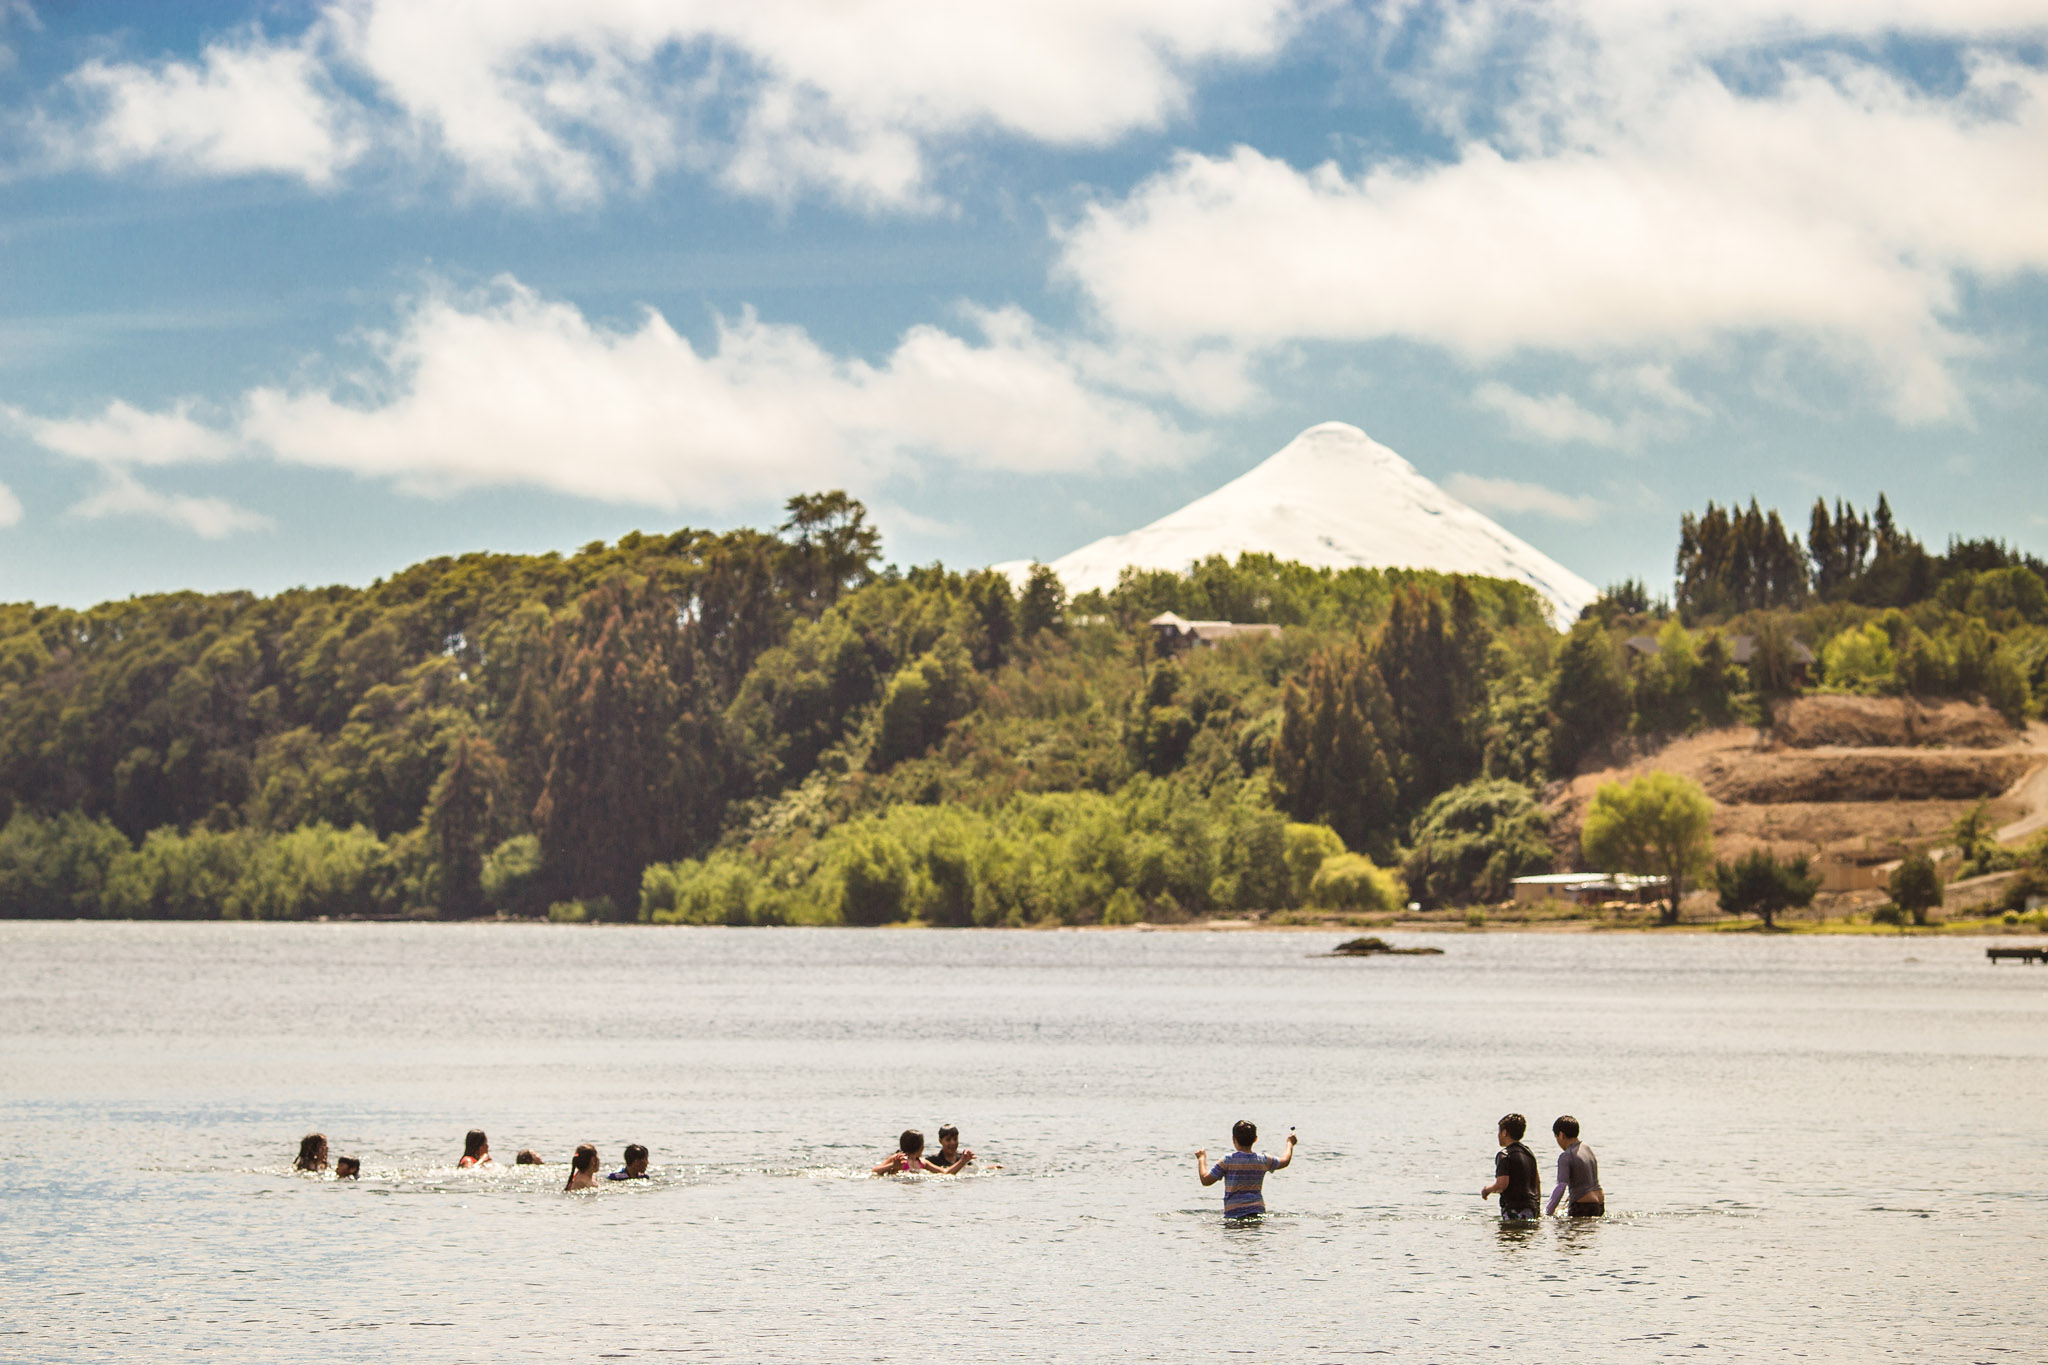  There aren't many countries where you can swim or windsurf on a lake, with a backdrop of a volcano 